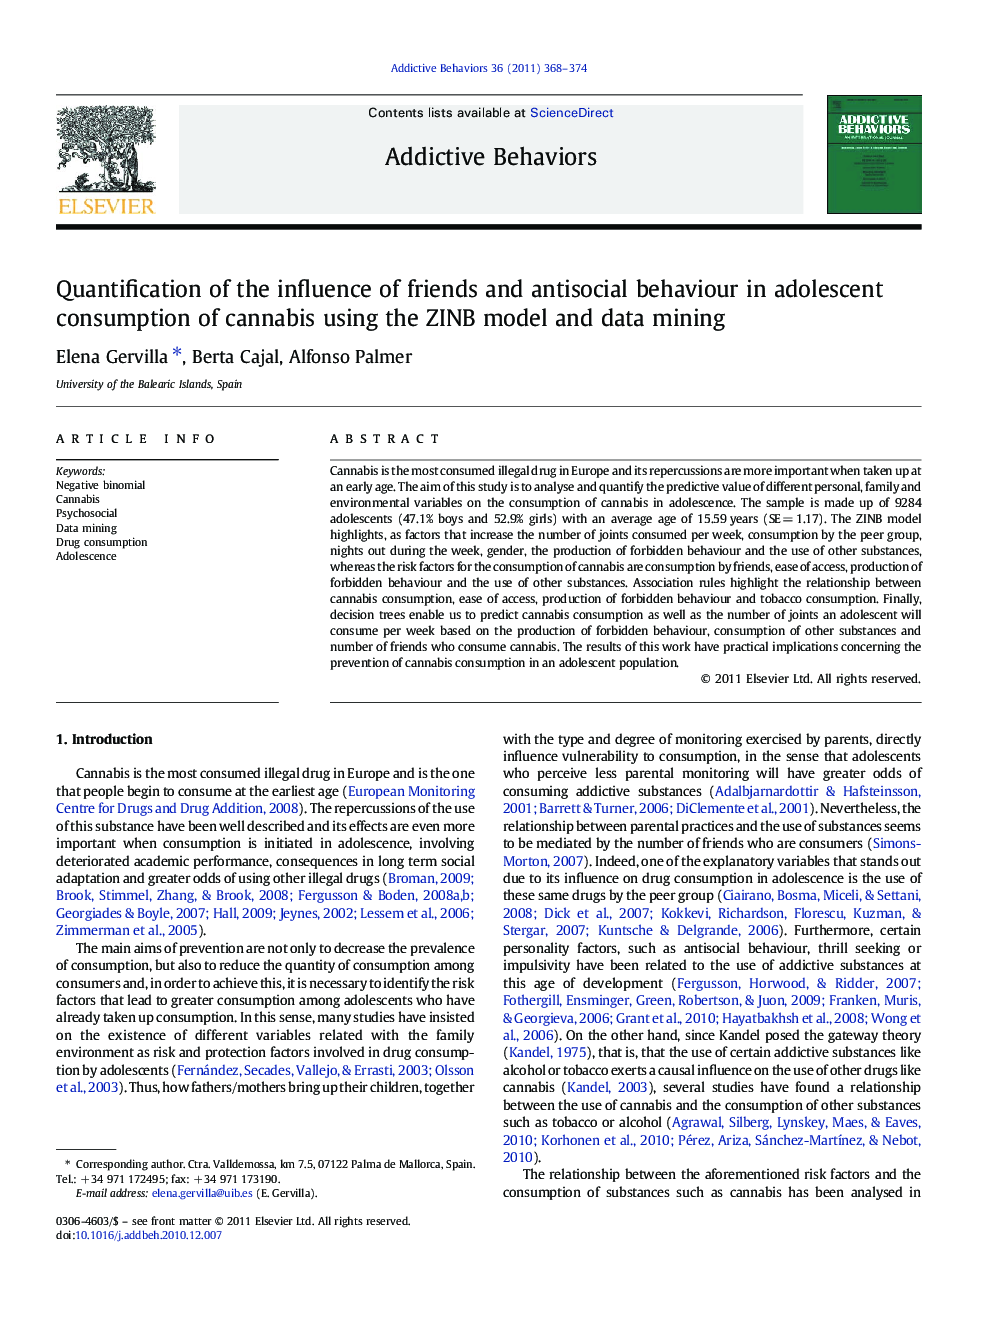 Quantification of the influence of friends and antisocial behaviour in adolescent consumption of cannabis using the ZINB model and data mining